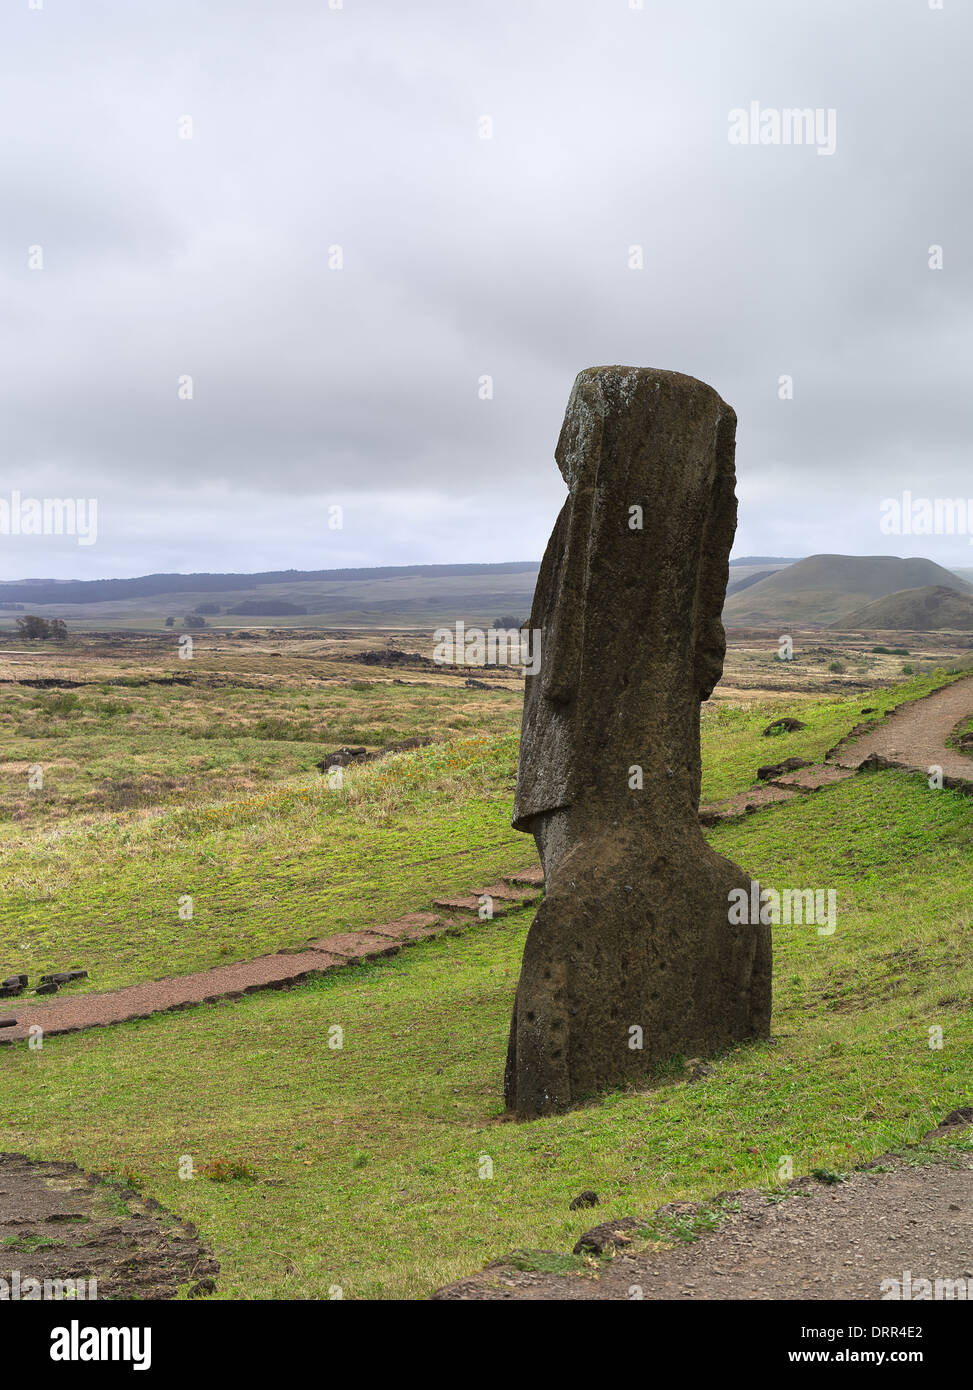 Chile. View of the stone statues moai 'Easter Island' panorama Stock Photo